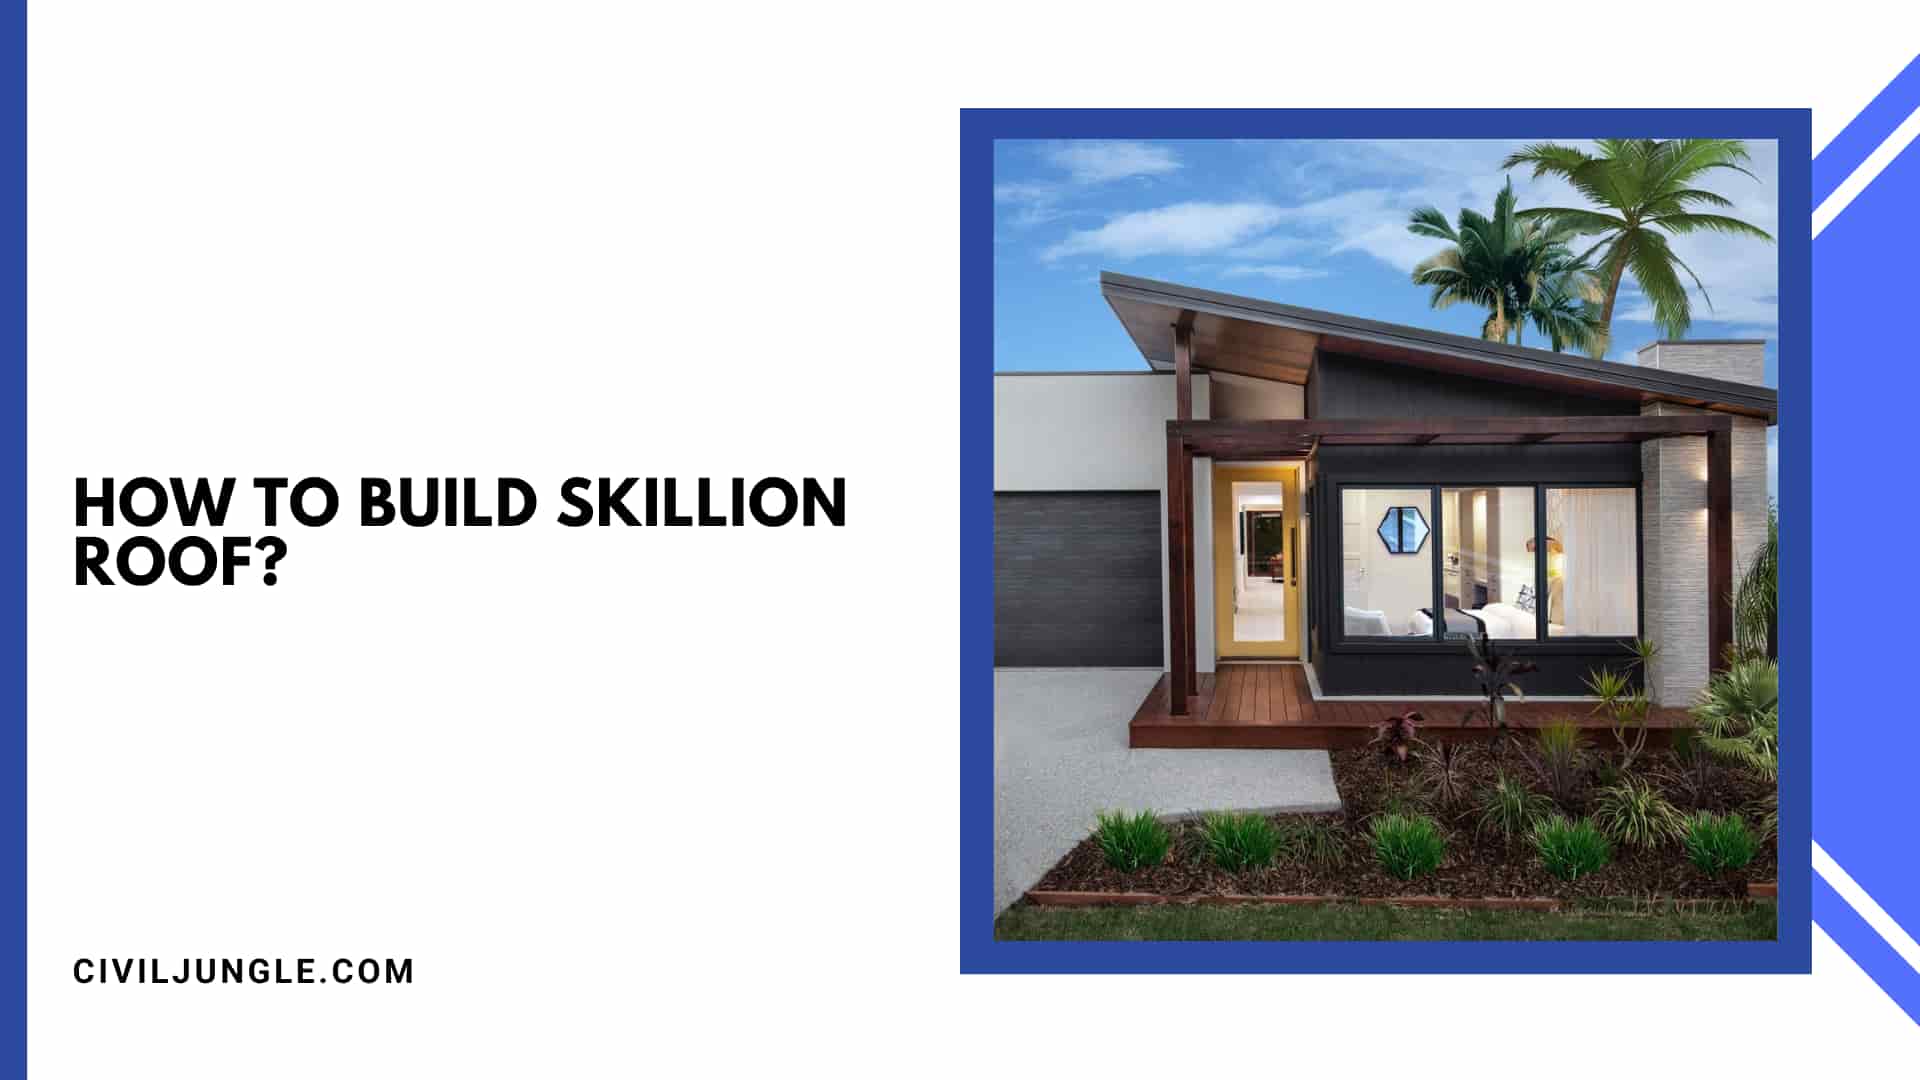 How to Build Skillion Roof